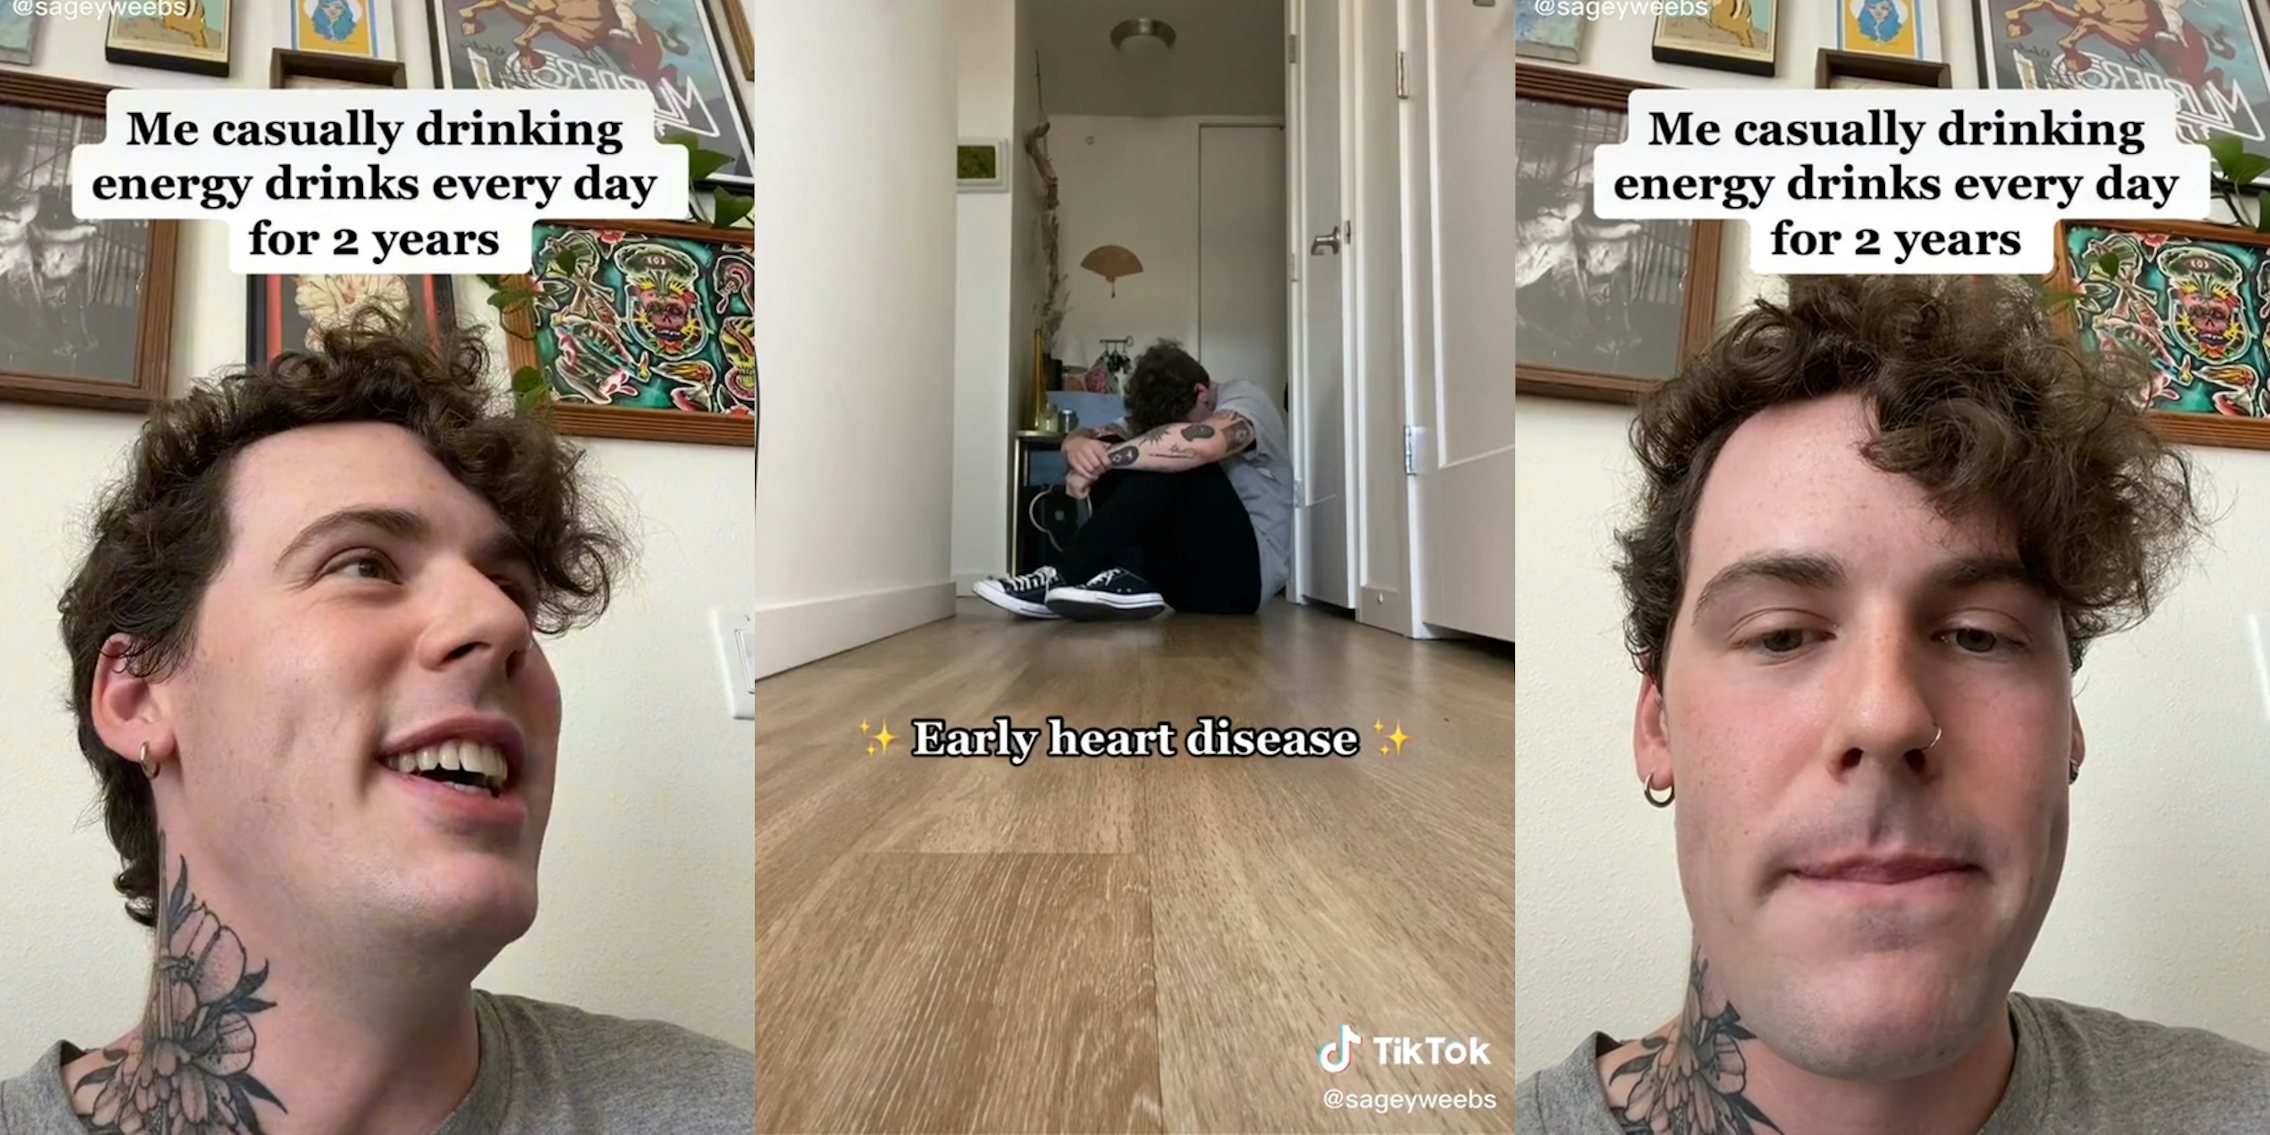 man with caption 'Me casually drinking energy drinks every day for 2 years' (l&r) man sitting on floor with head between arms and caption 'Early heart disease' (c)